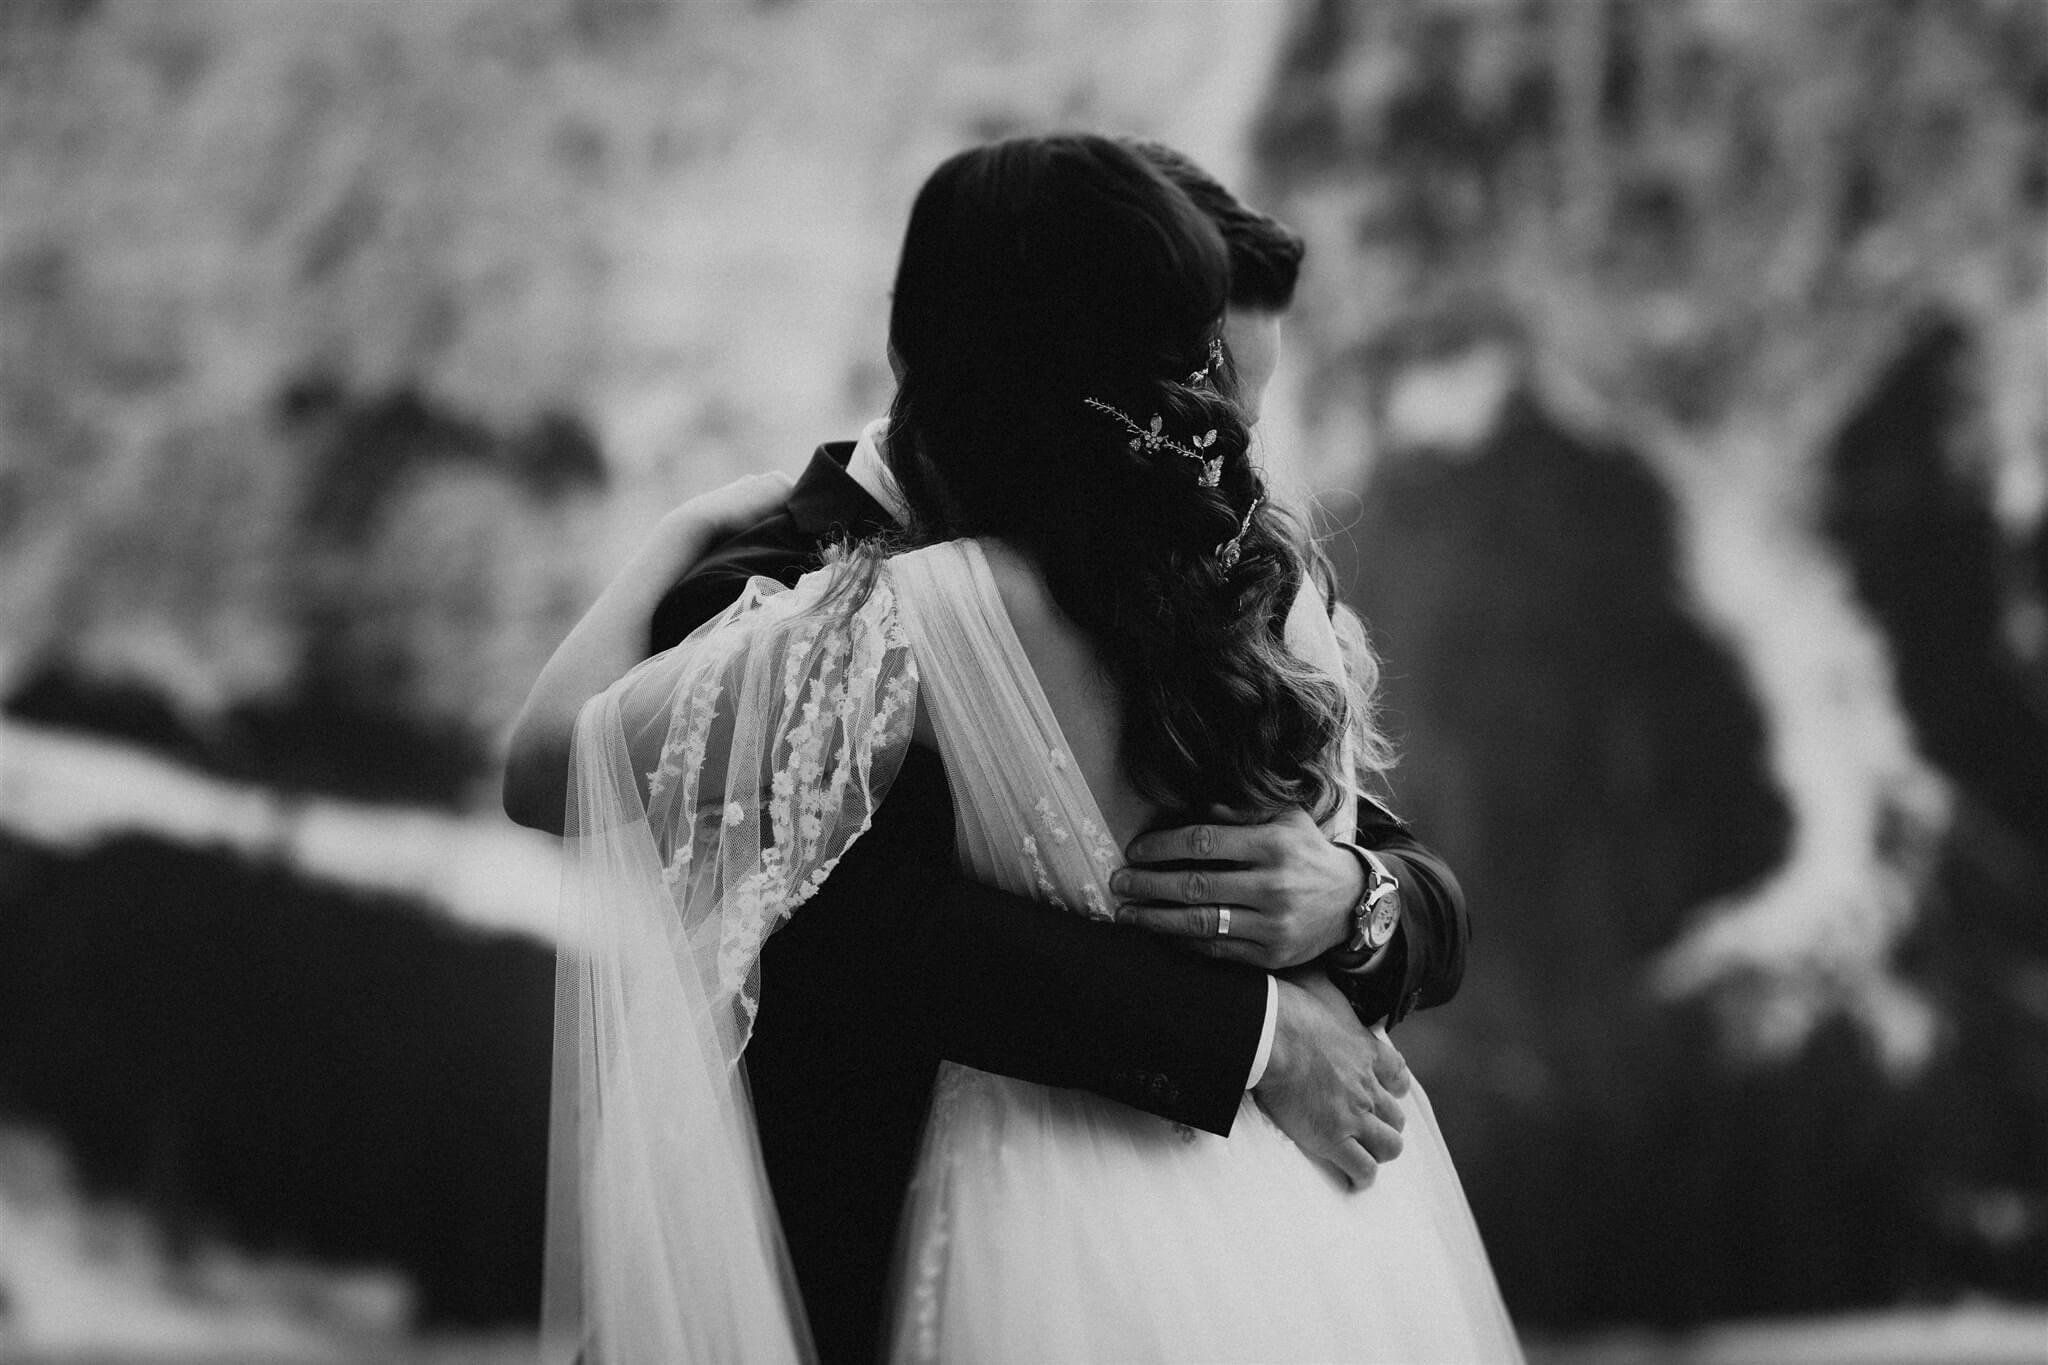 Bride and groom hug after exchanging vows by the lake at intimate vow renewal in Italy